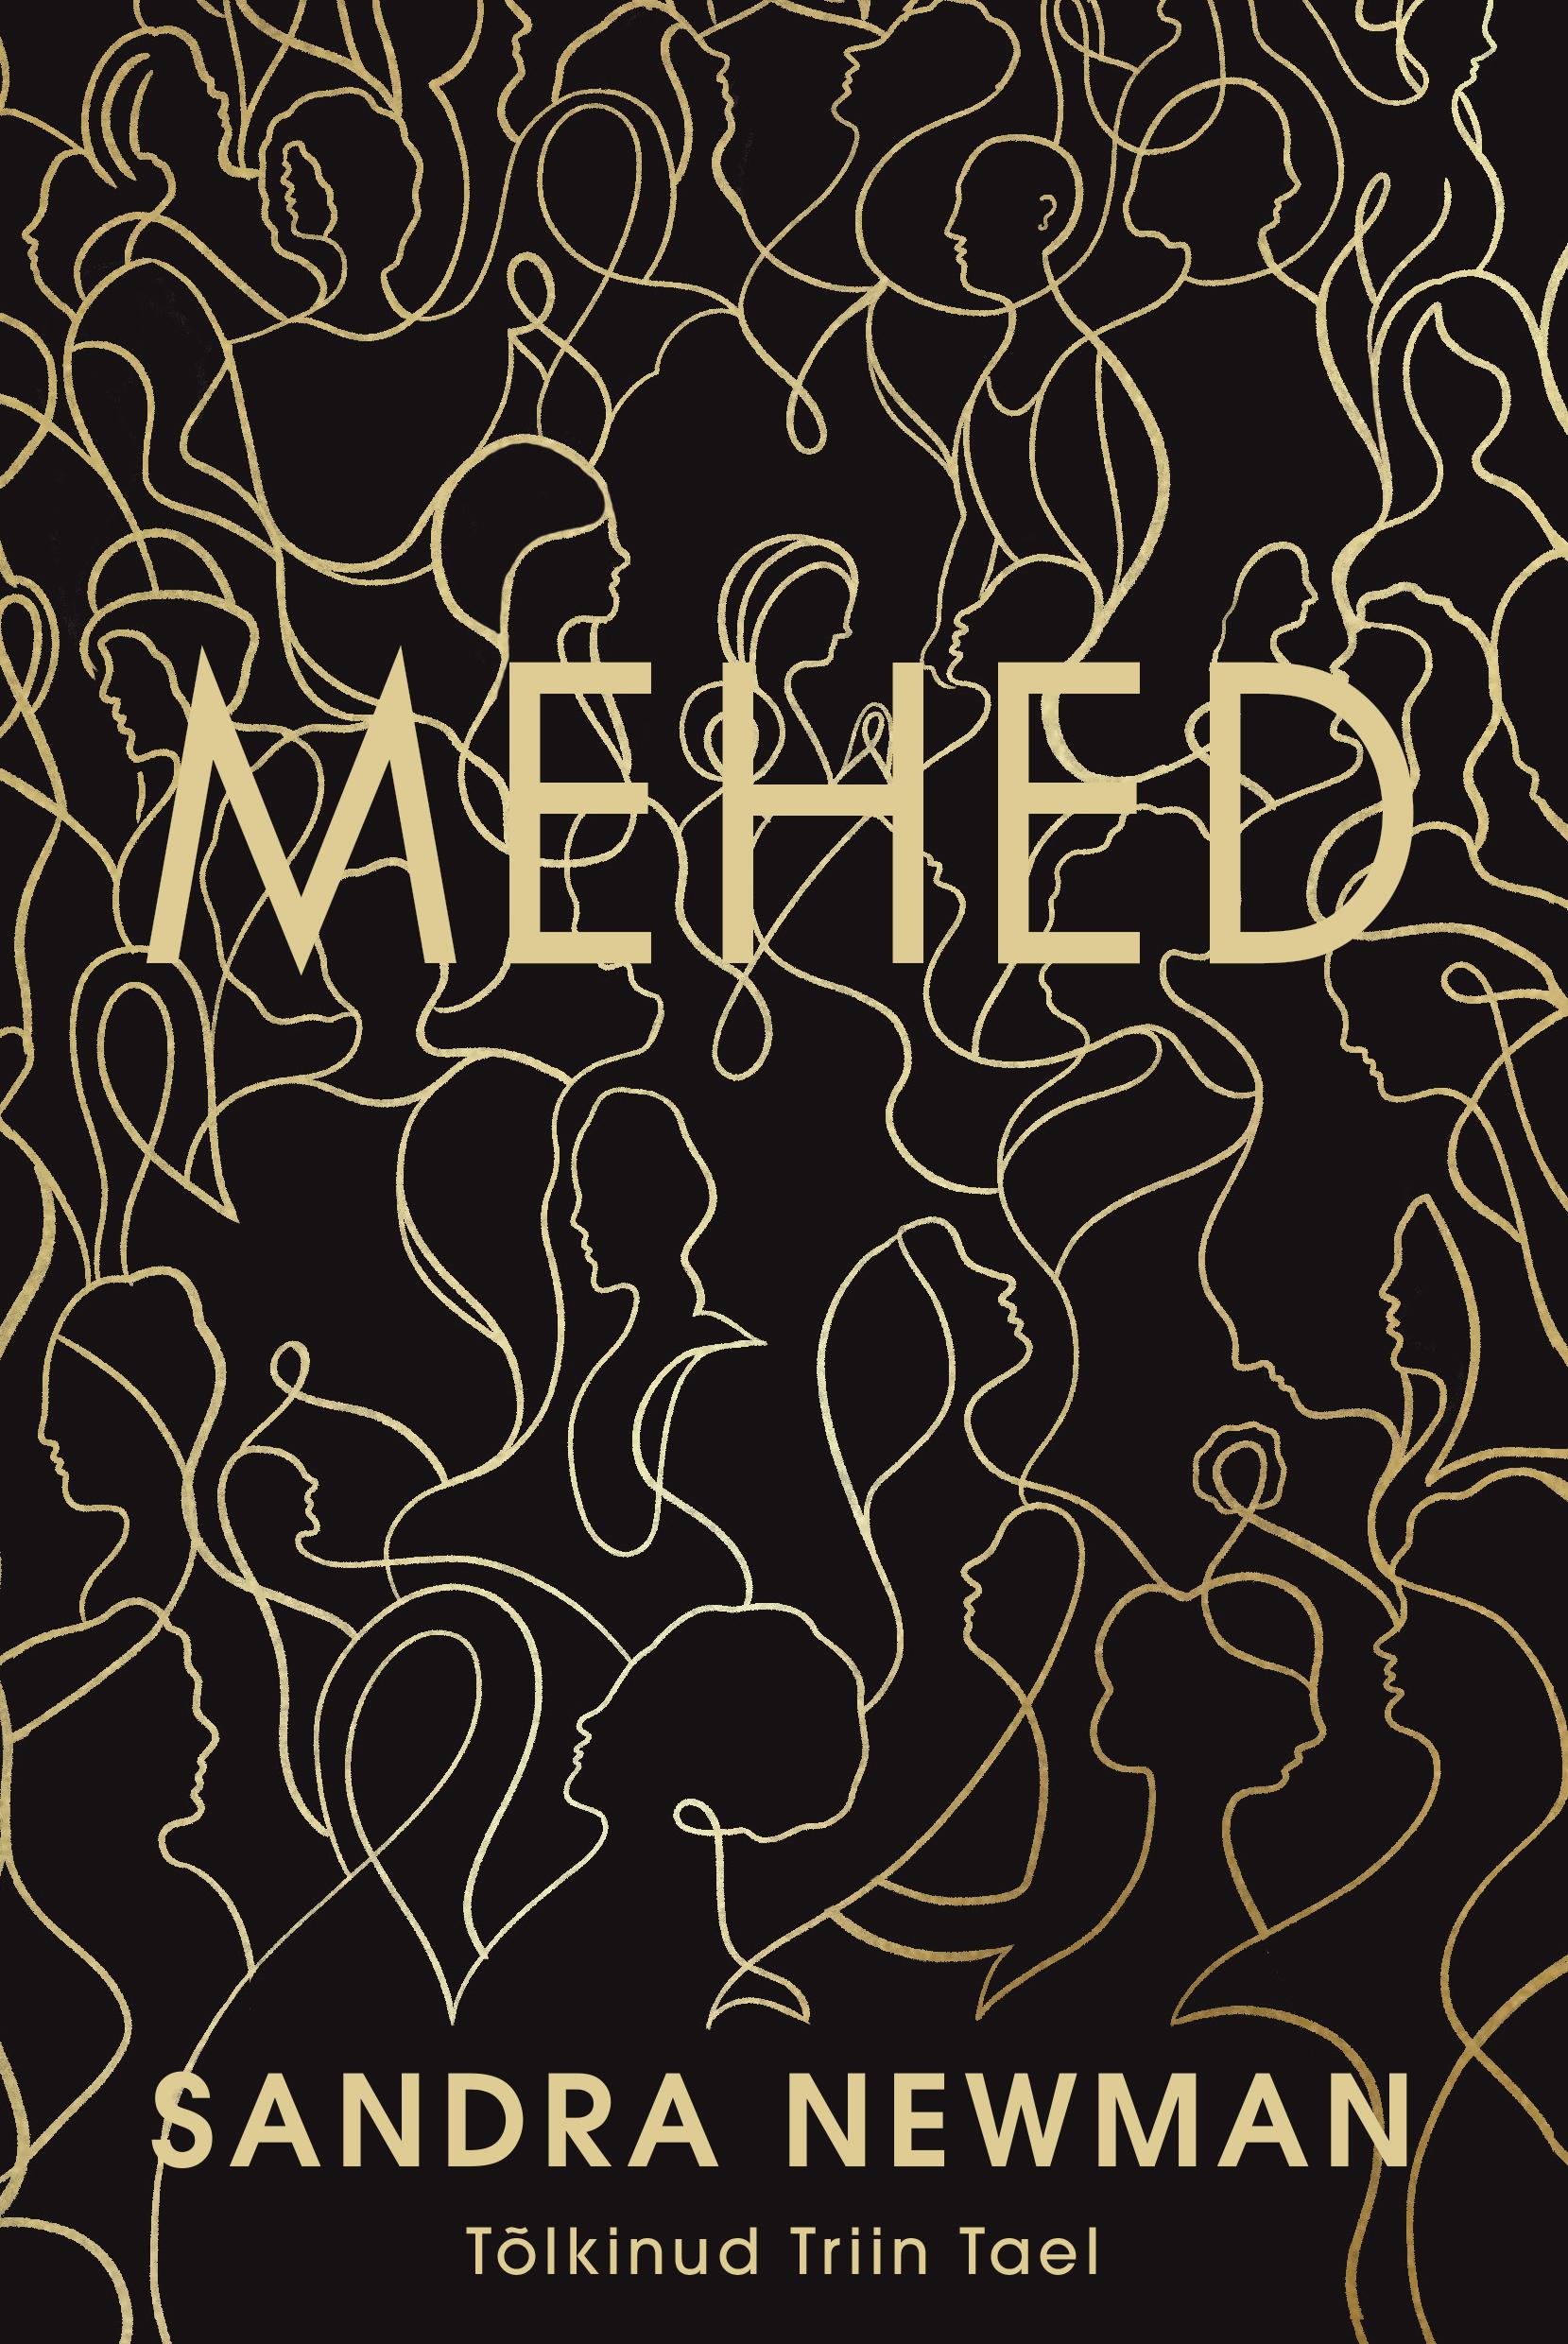 Mehed